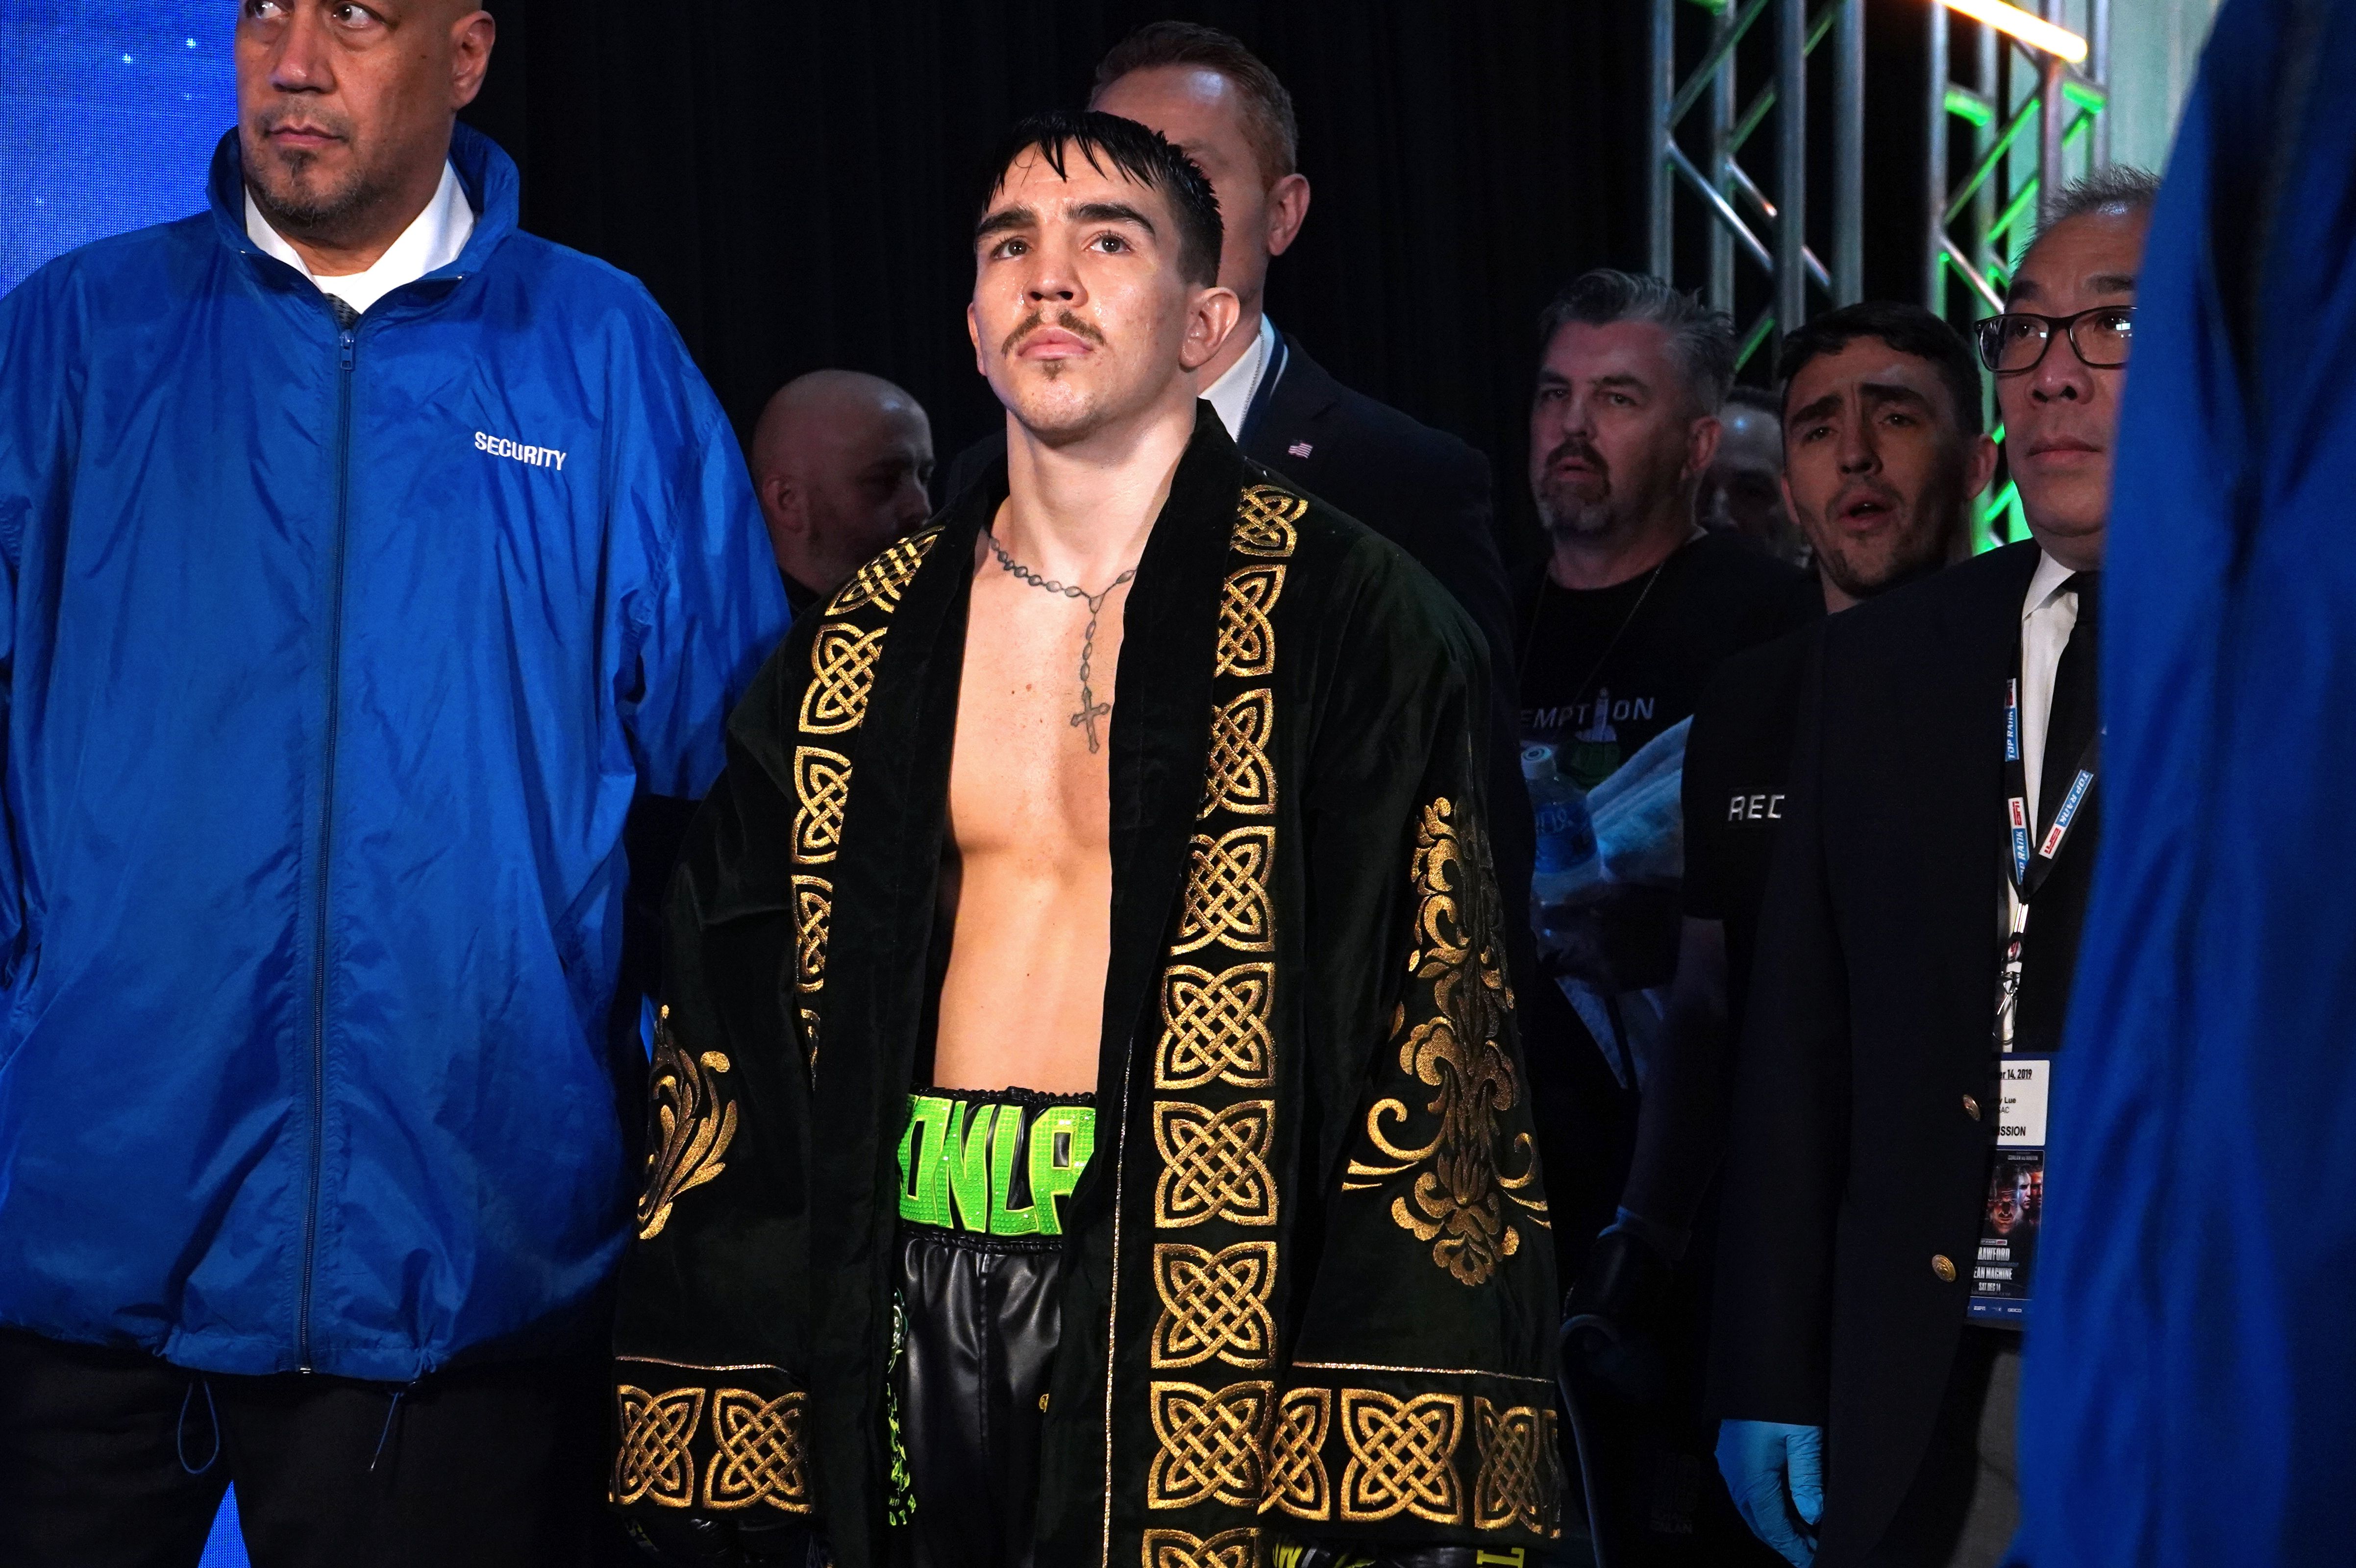 Michael Conlan is one win away from a world title fight against WBO super-bantamweight champion Stephen Fulton according to his promoter Bob Arum